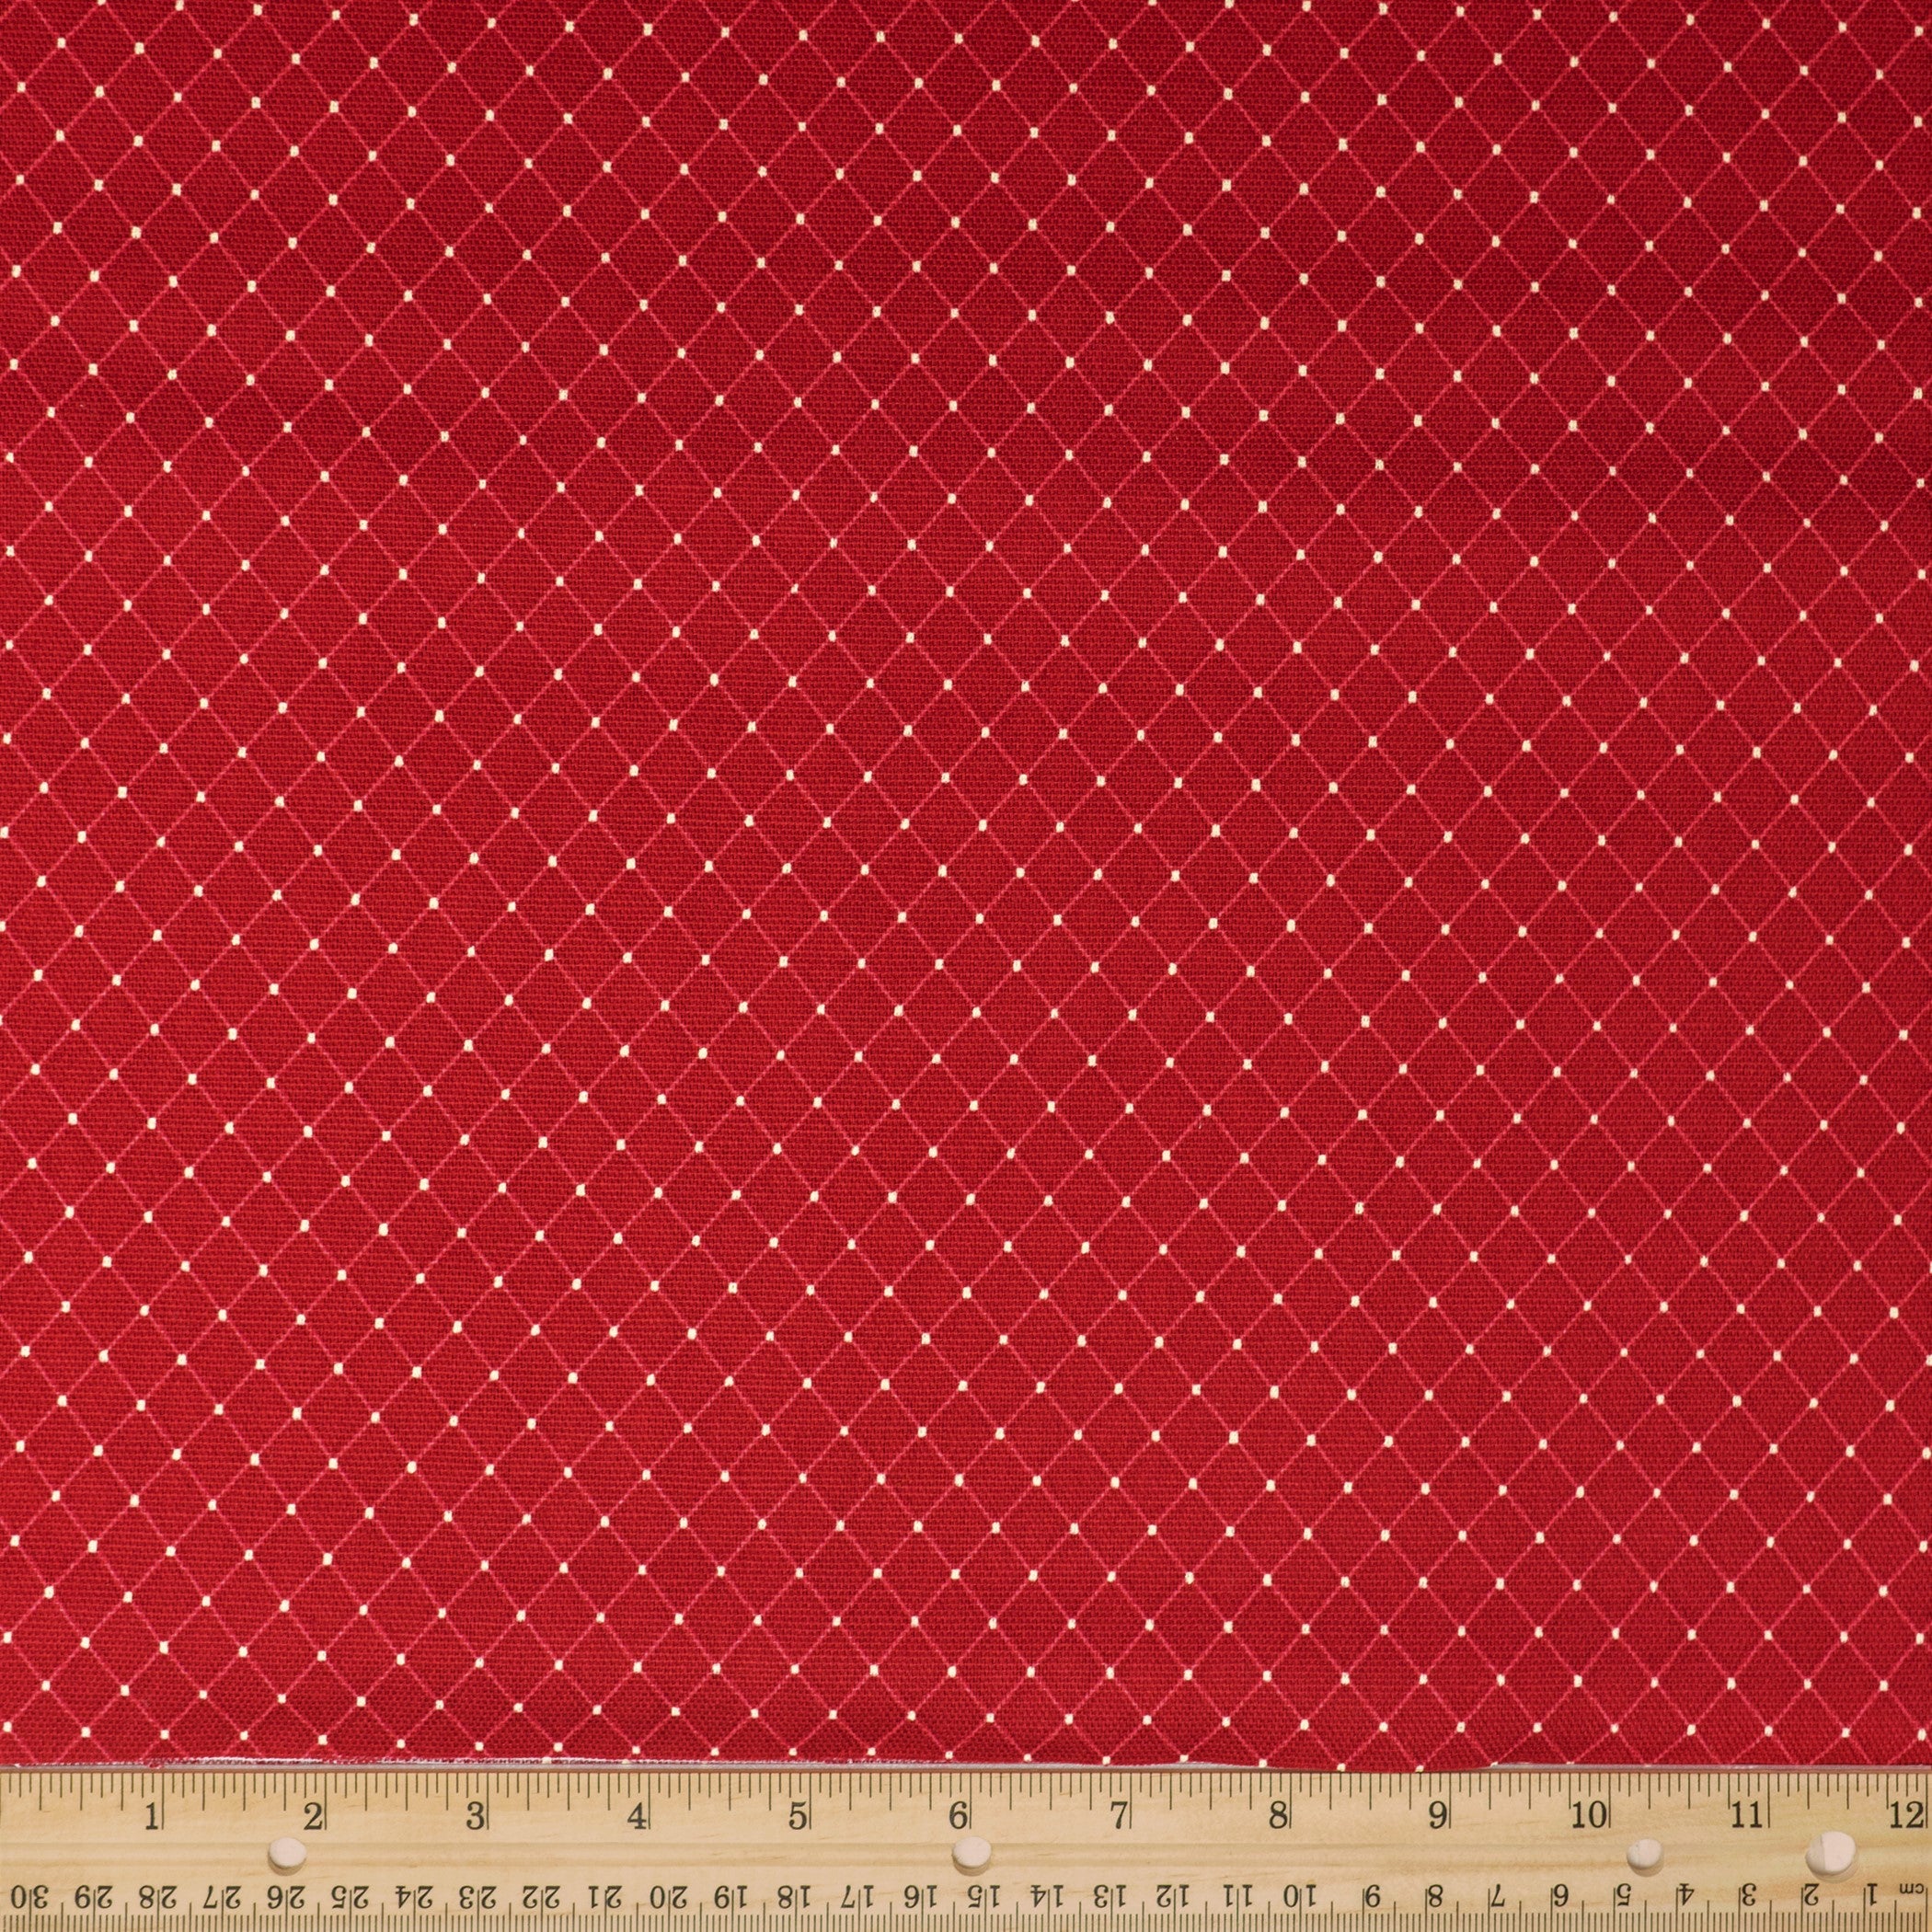 Waverly Inspirations 100% Cotton Duck 45" Width Diamond Ruby Color Sewing Fabric by the Yard